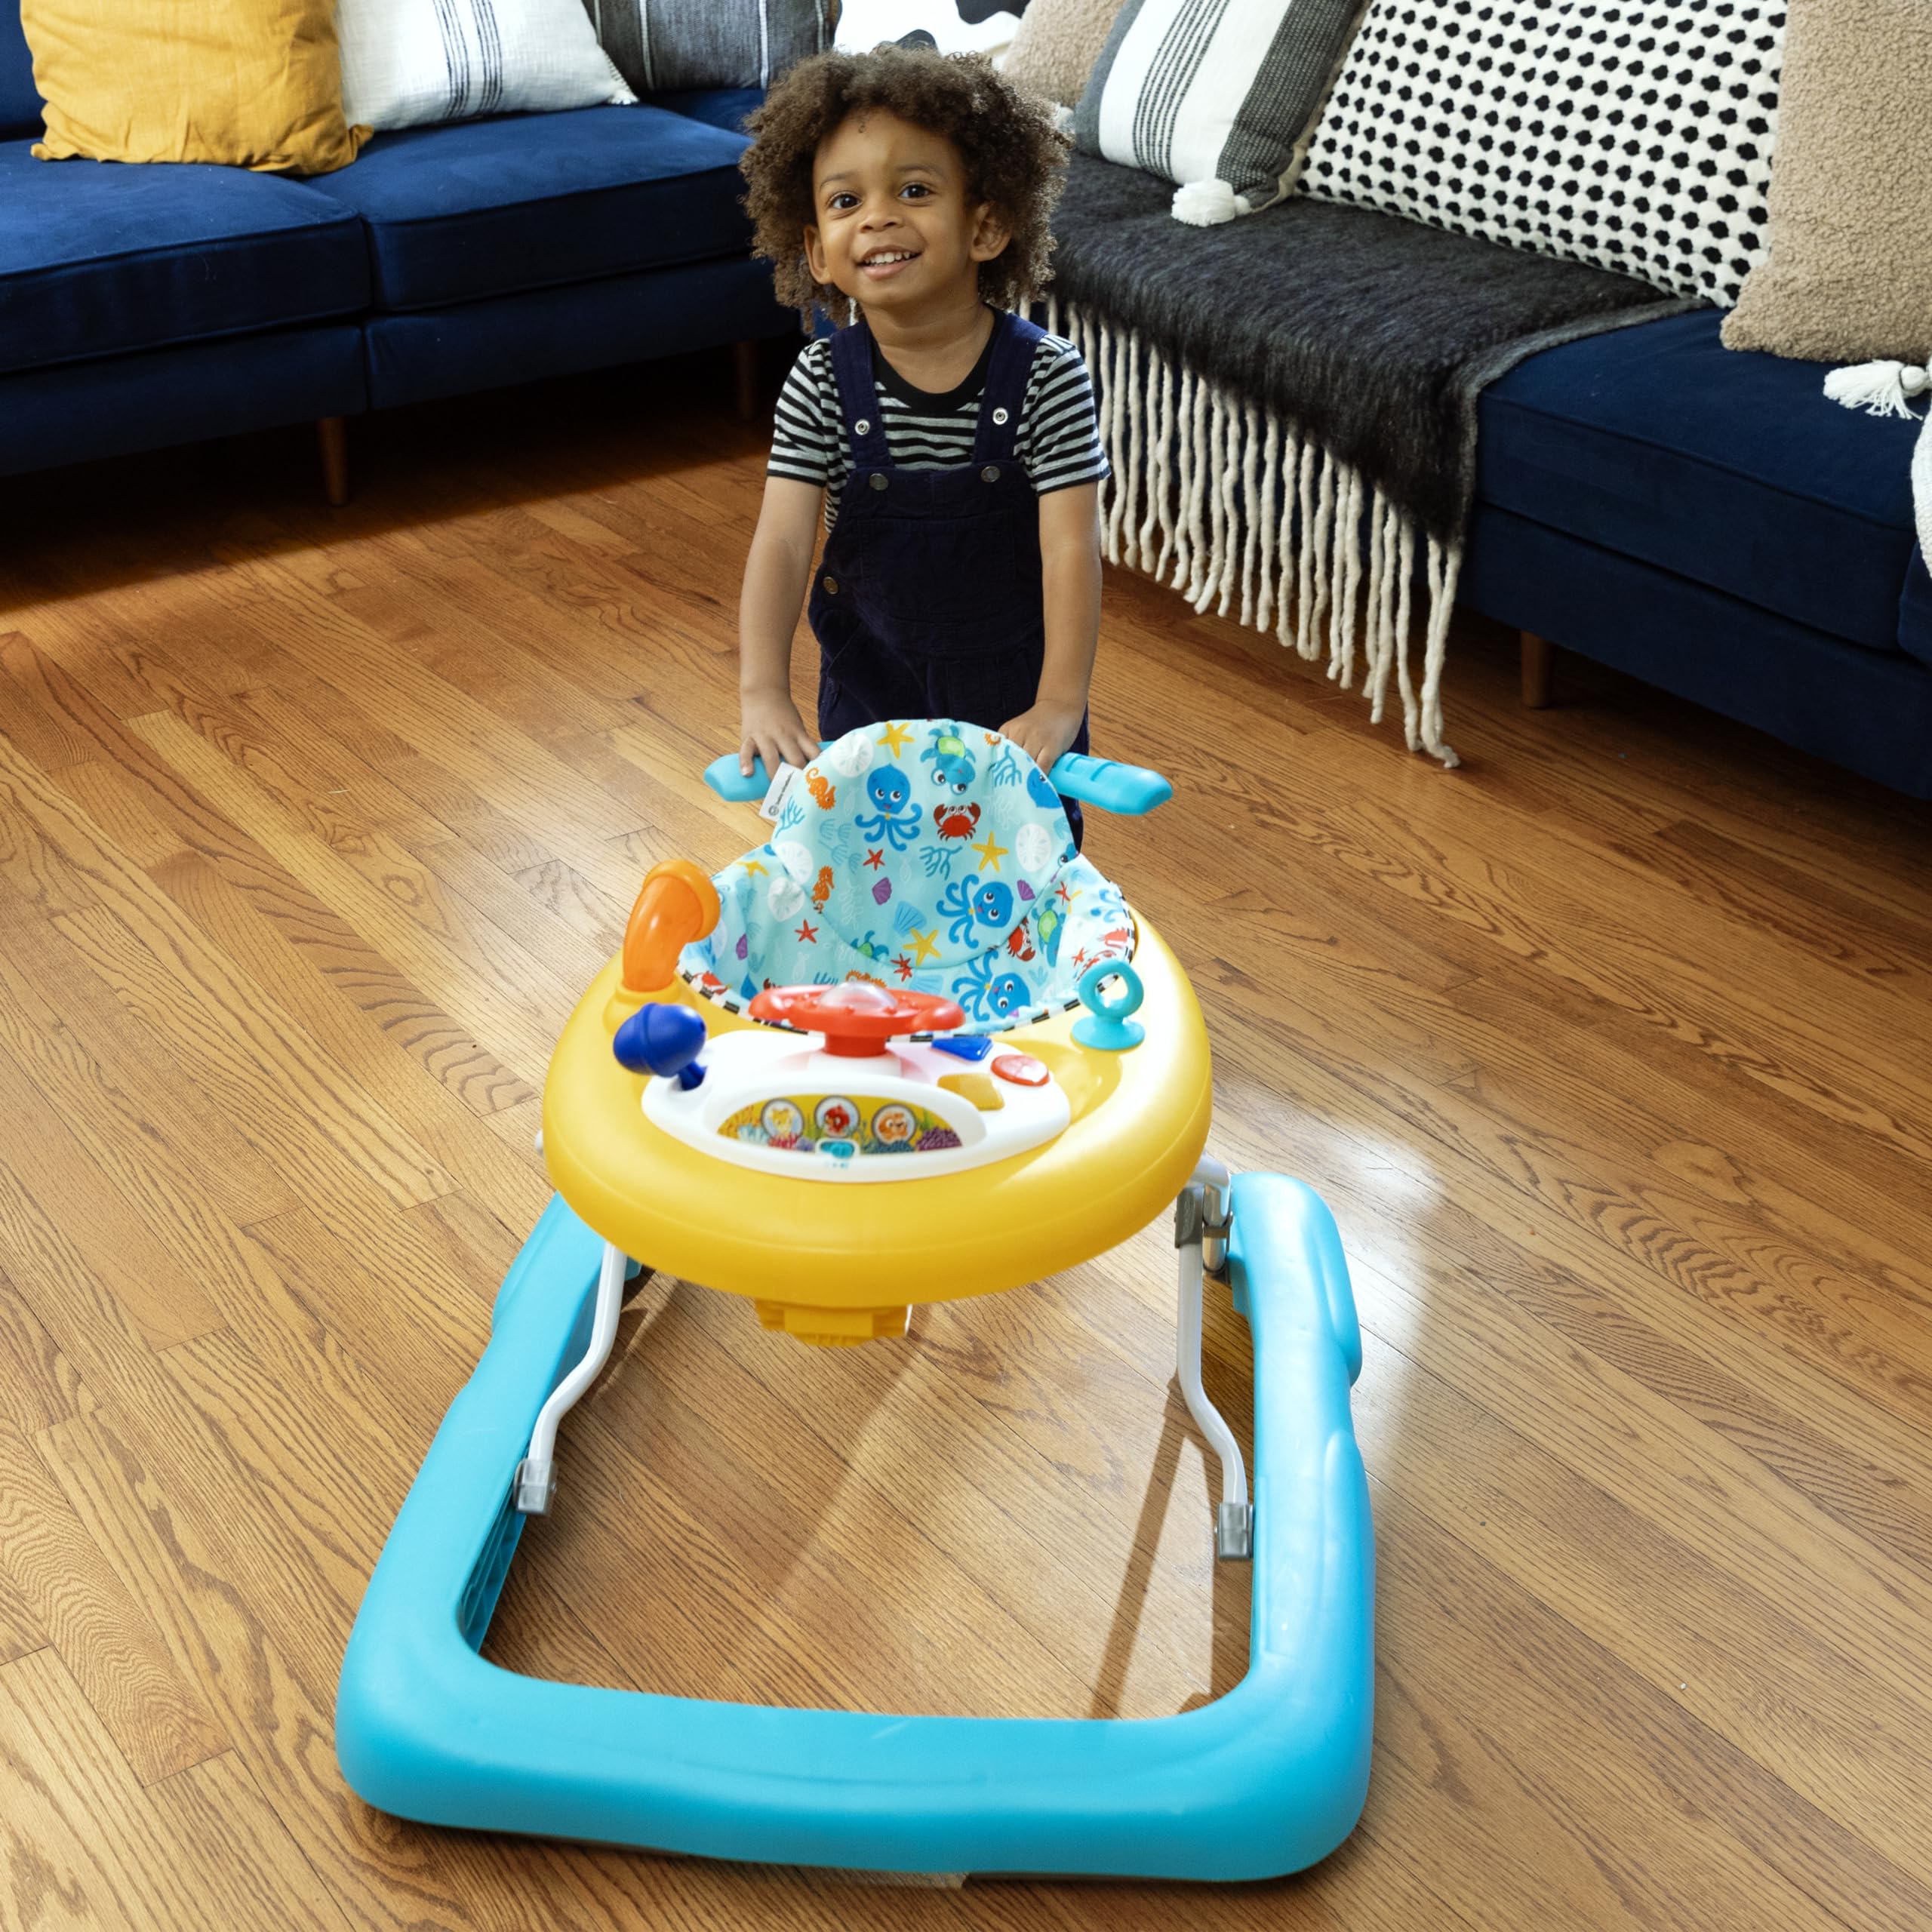 Baby Einstein Ocean Explorers Dive & Discover 3-in-1 Submarine Walker, with Removable Floor-Toy, Ages 6 Months and Up